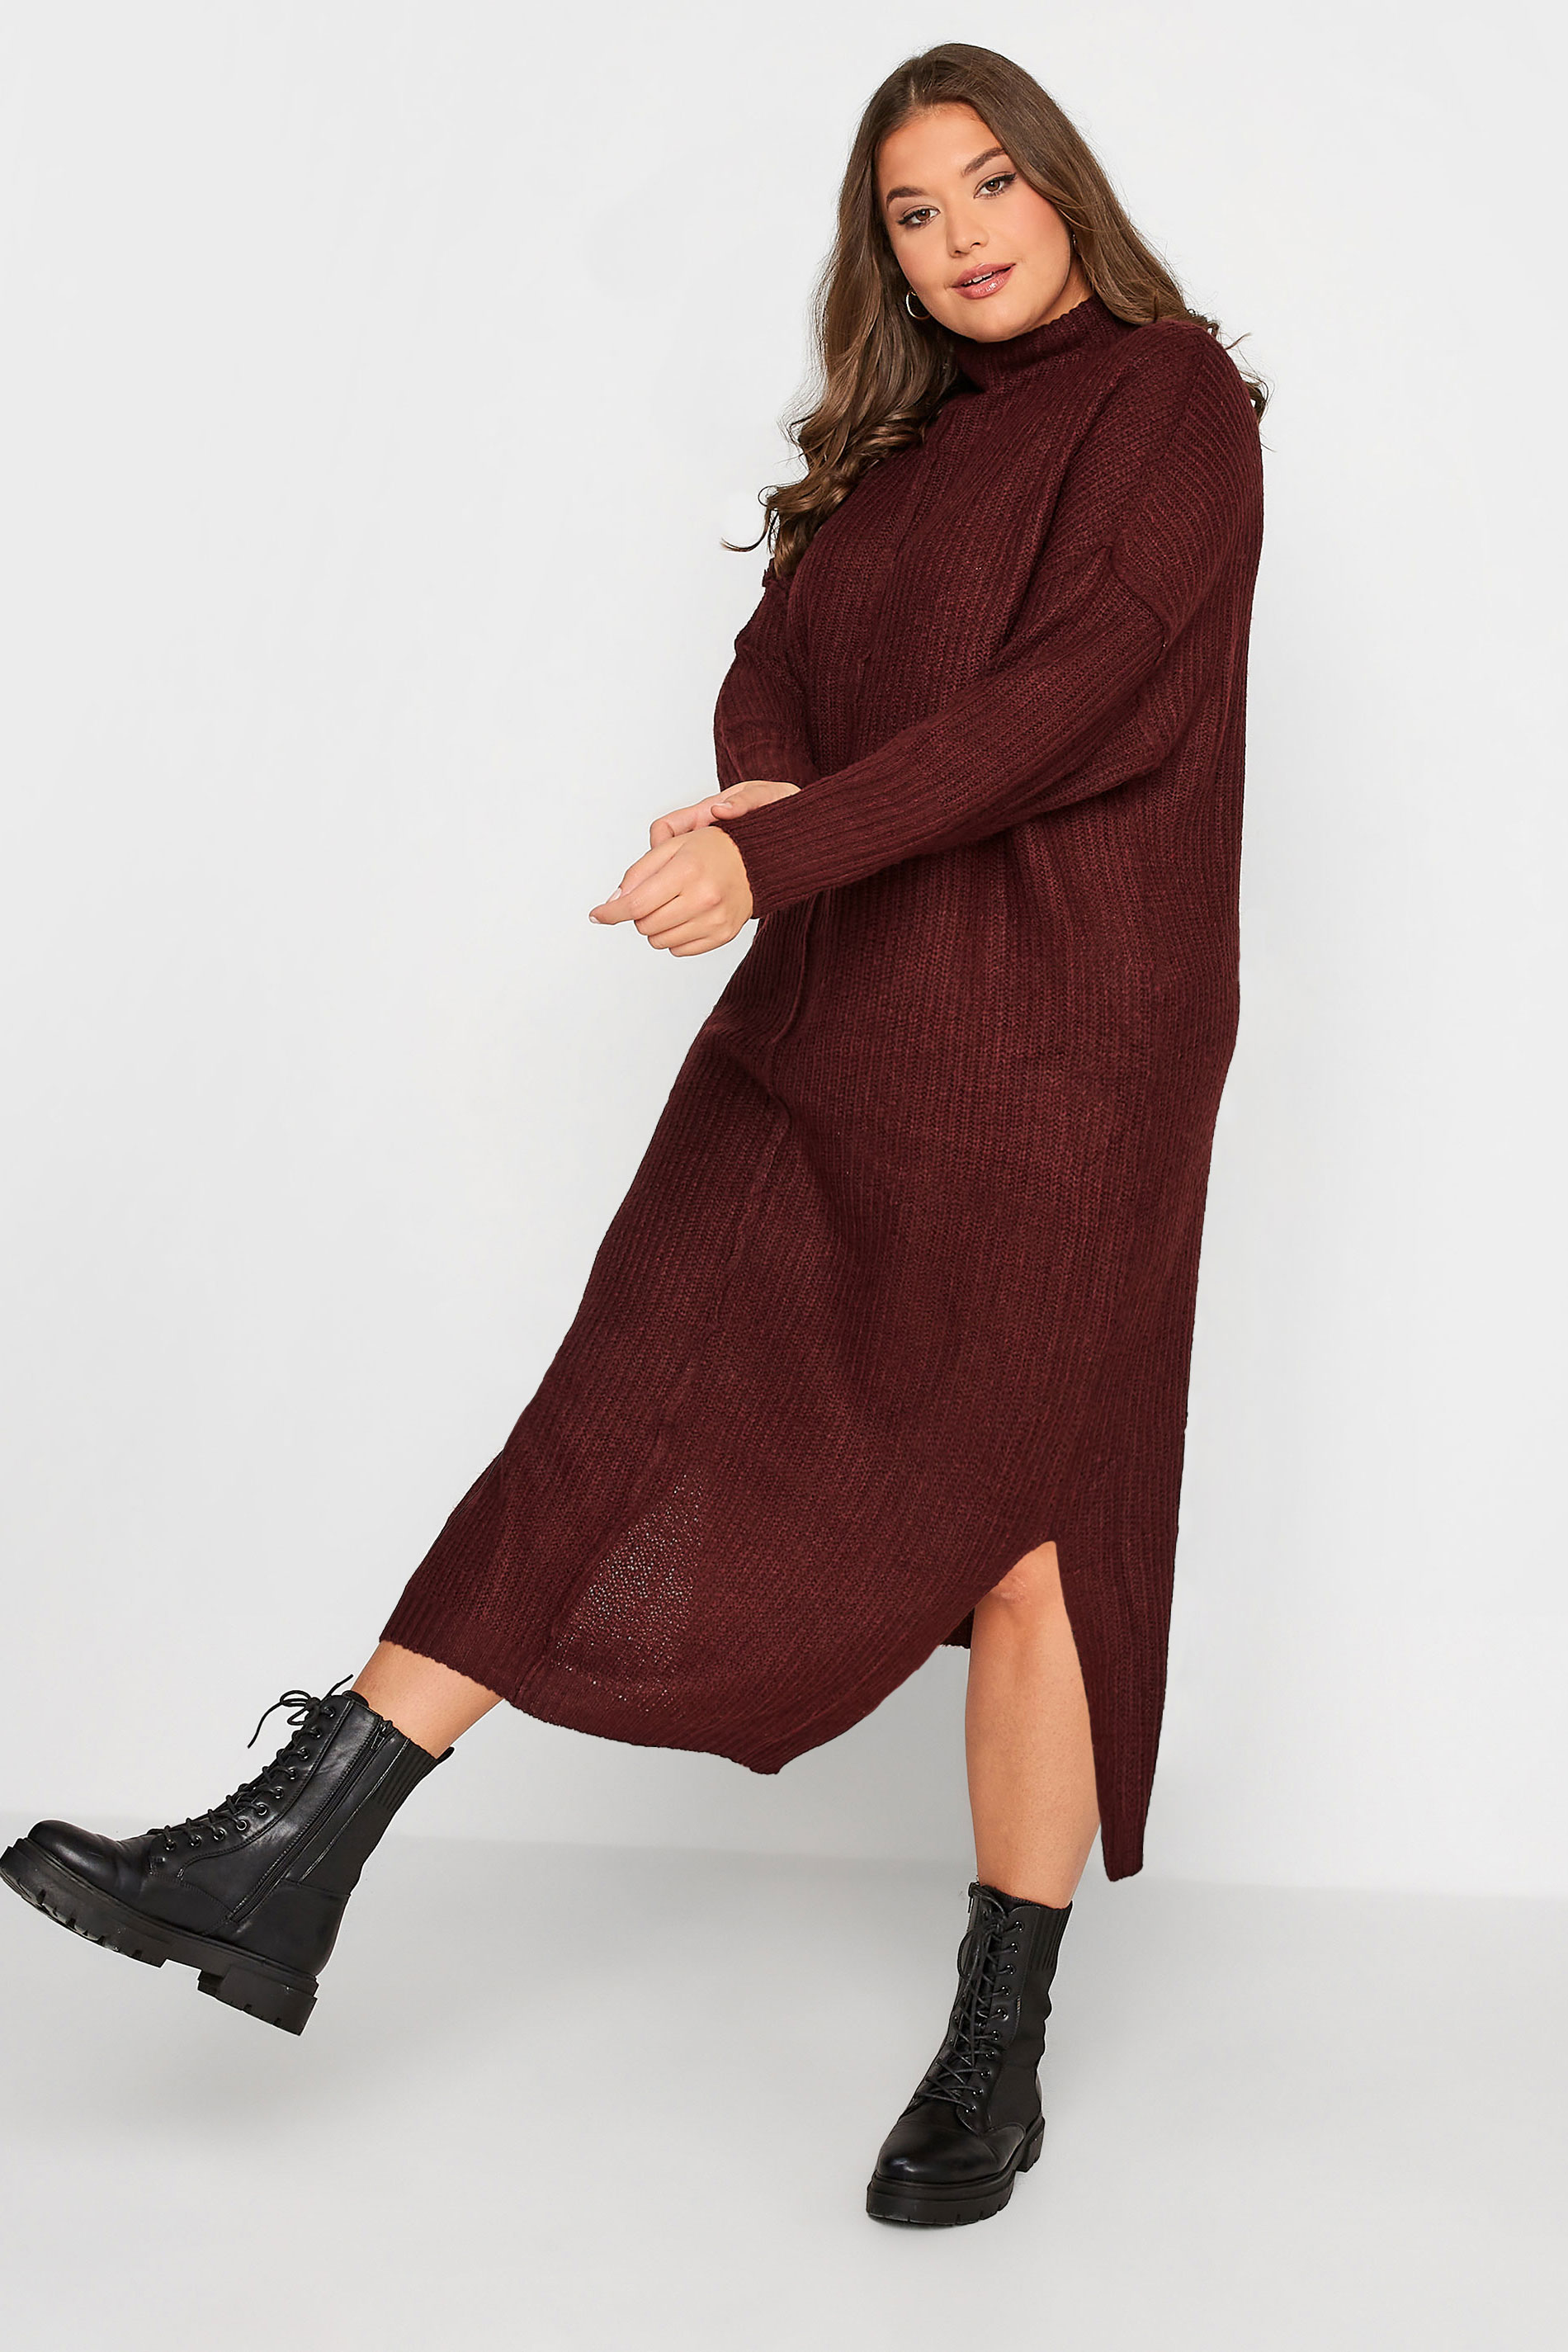 Plus Size Burgundy Red Knitted Jumper Dress | Yours Clothing 2